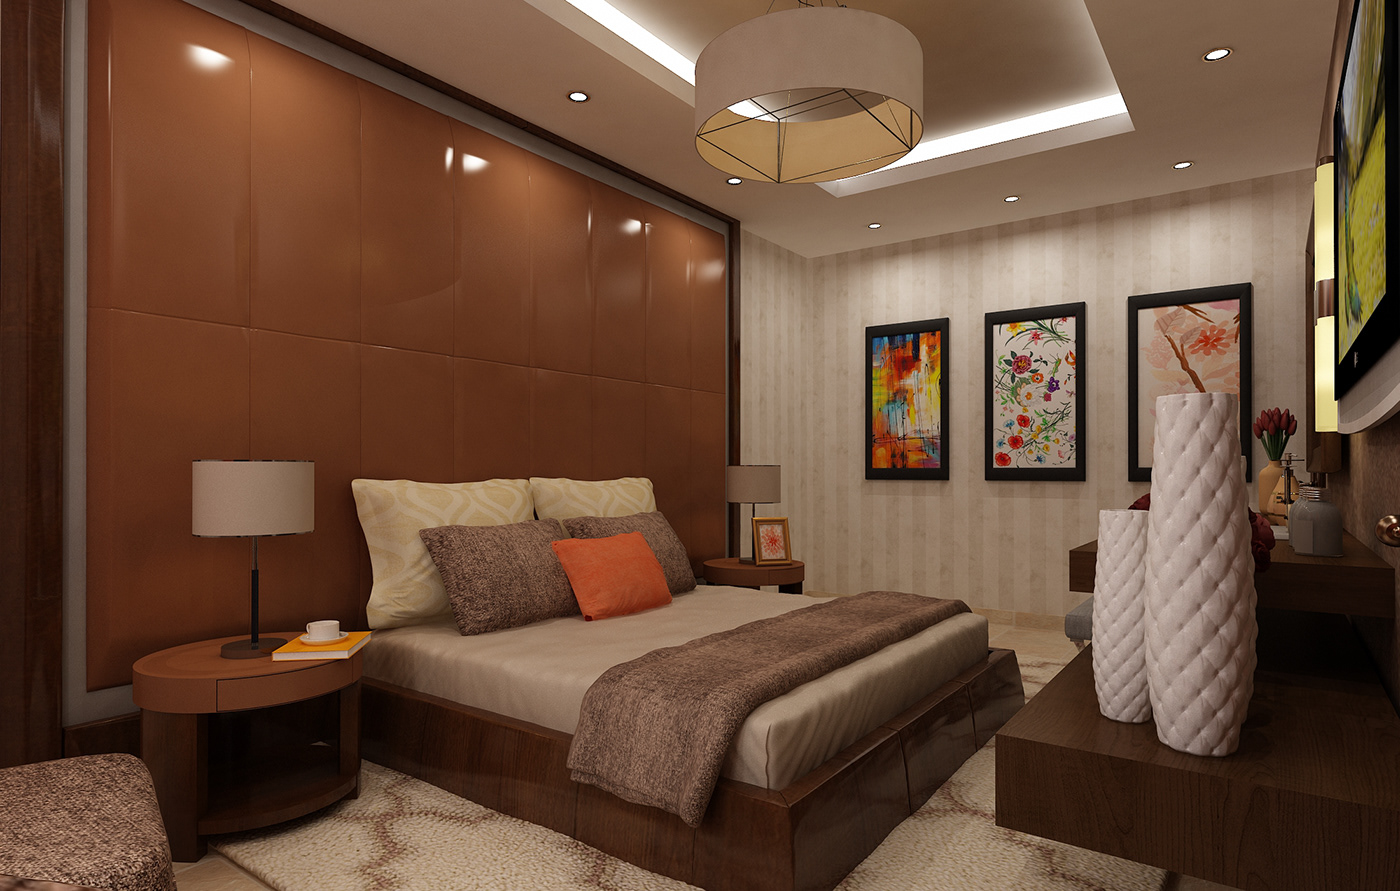 3dsmax 3dvisualization architect AutoCAD homestyle interior design  rendering shop drawnigs vray working drawings